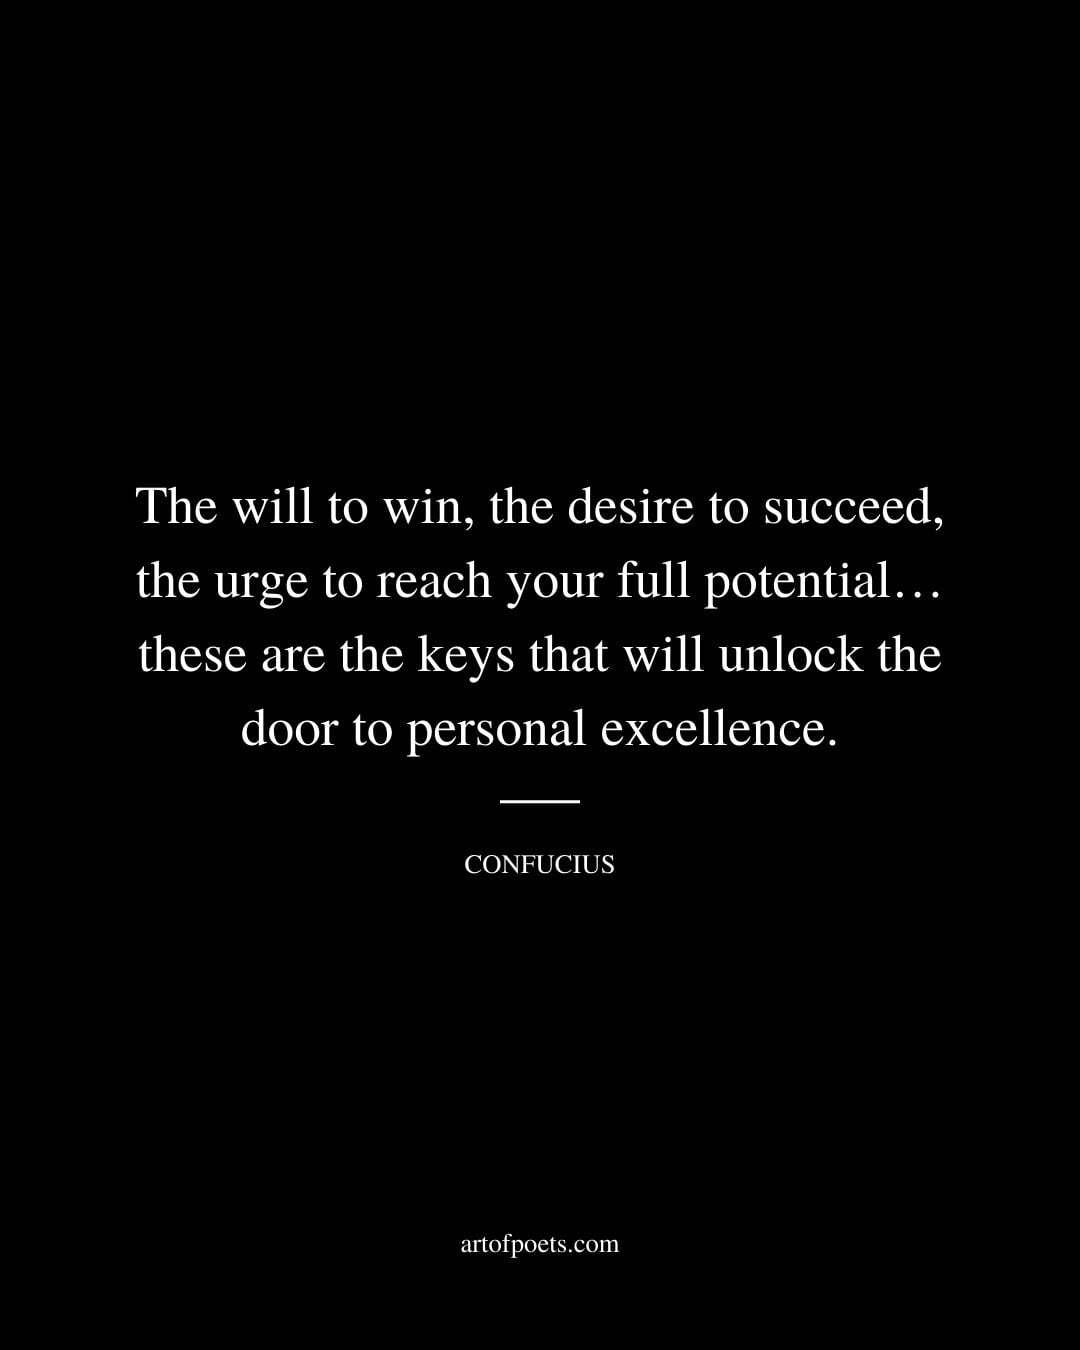 The will to win the desire to succeed the urge to reach your full potential